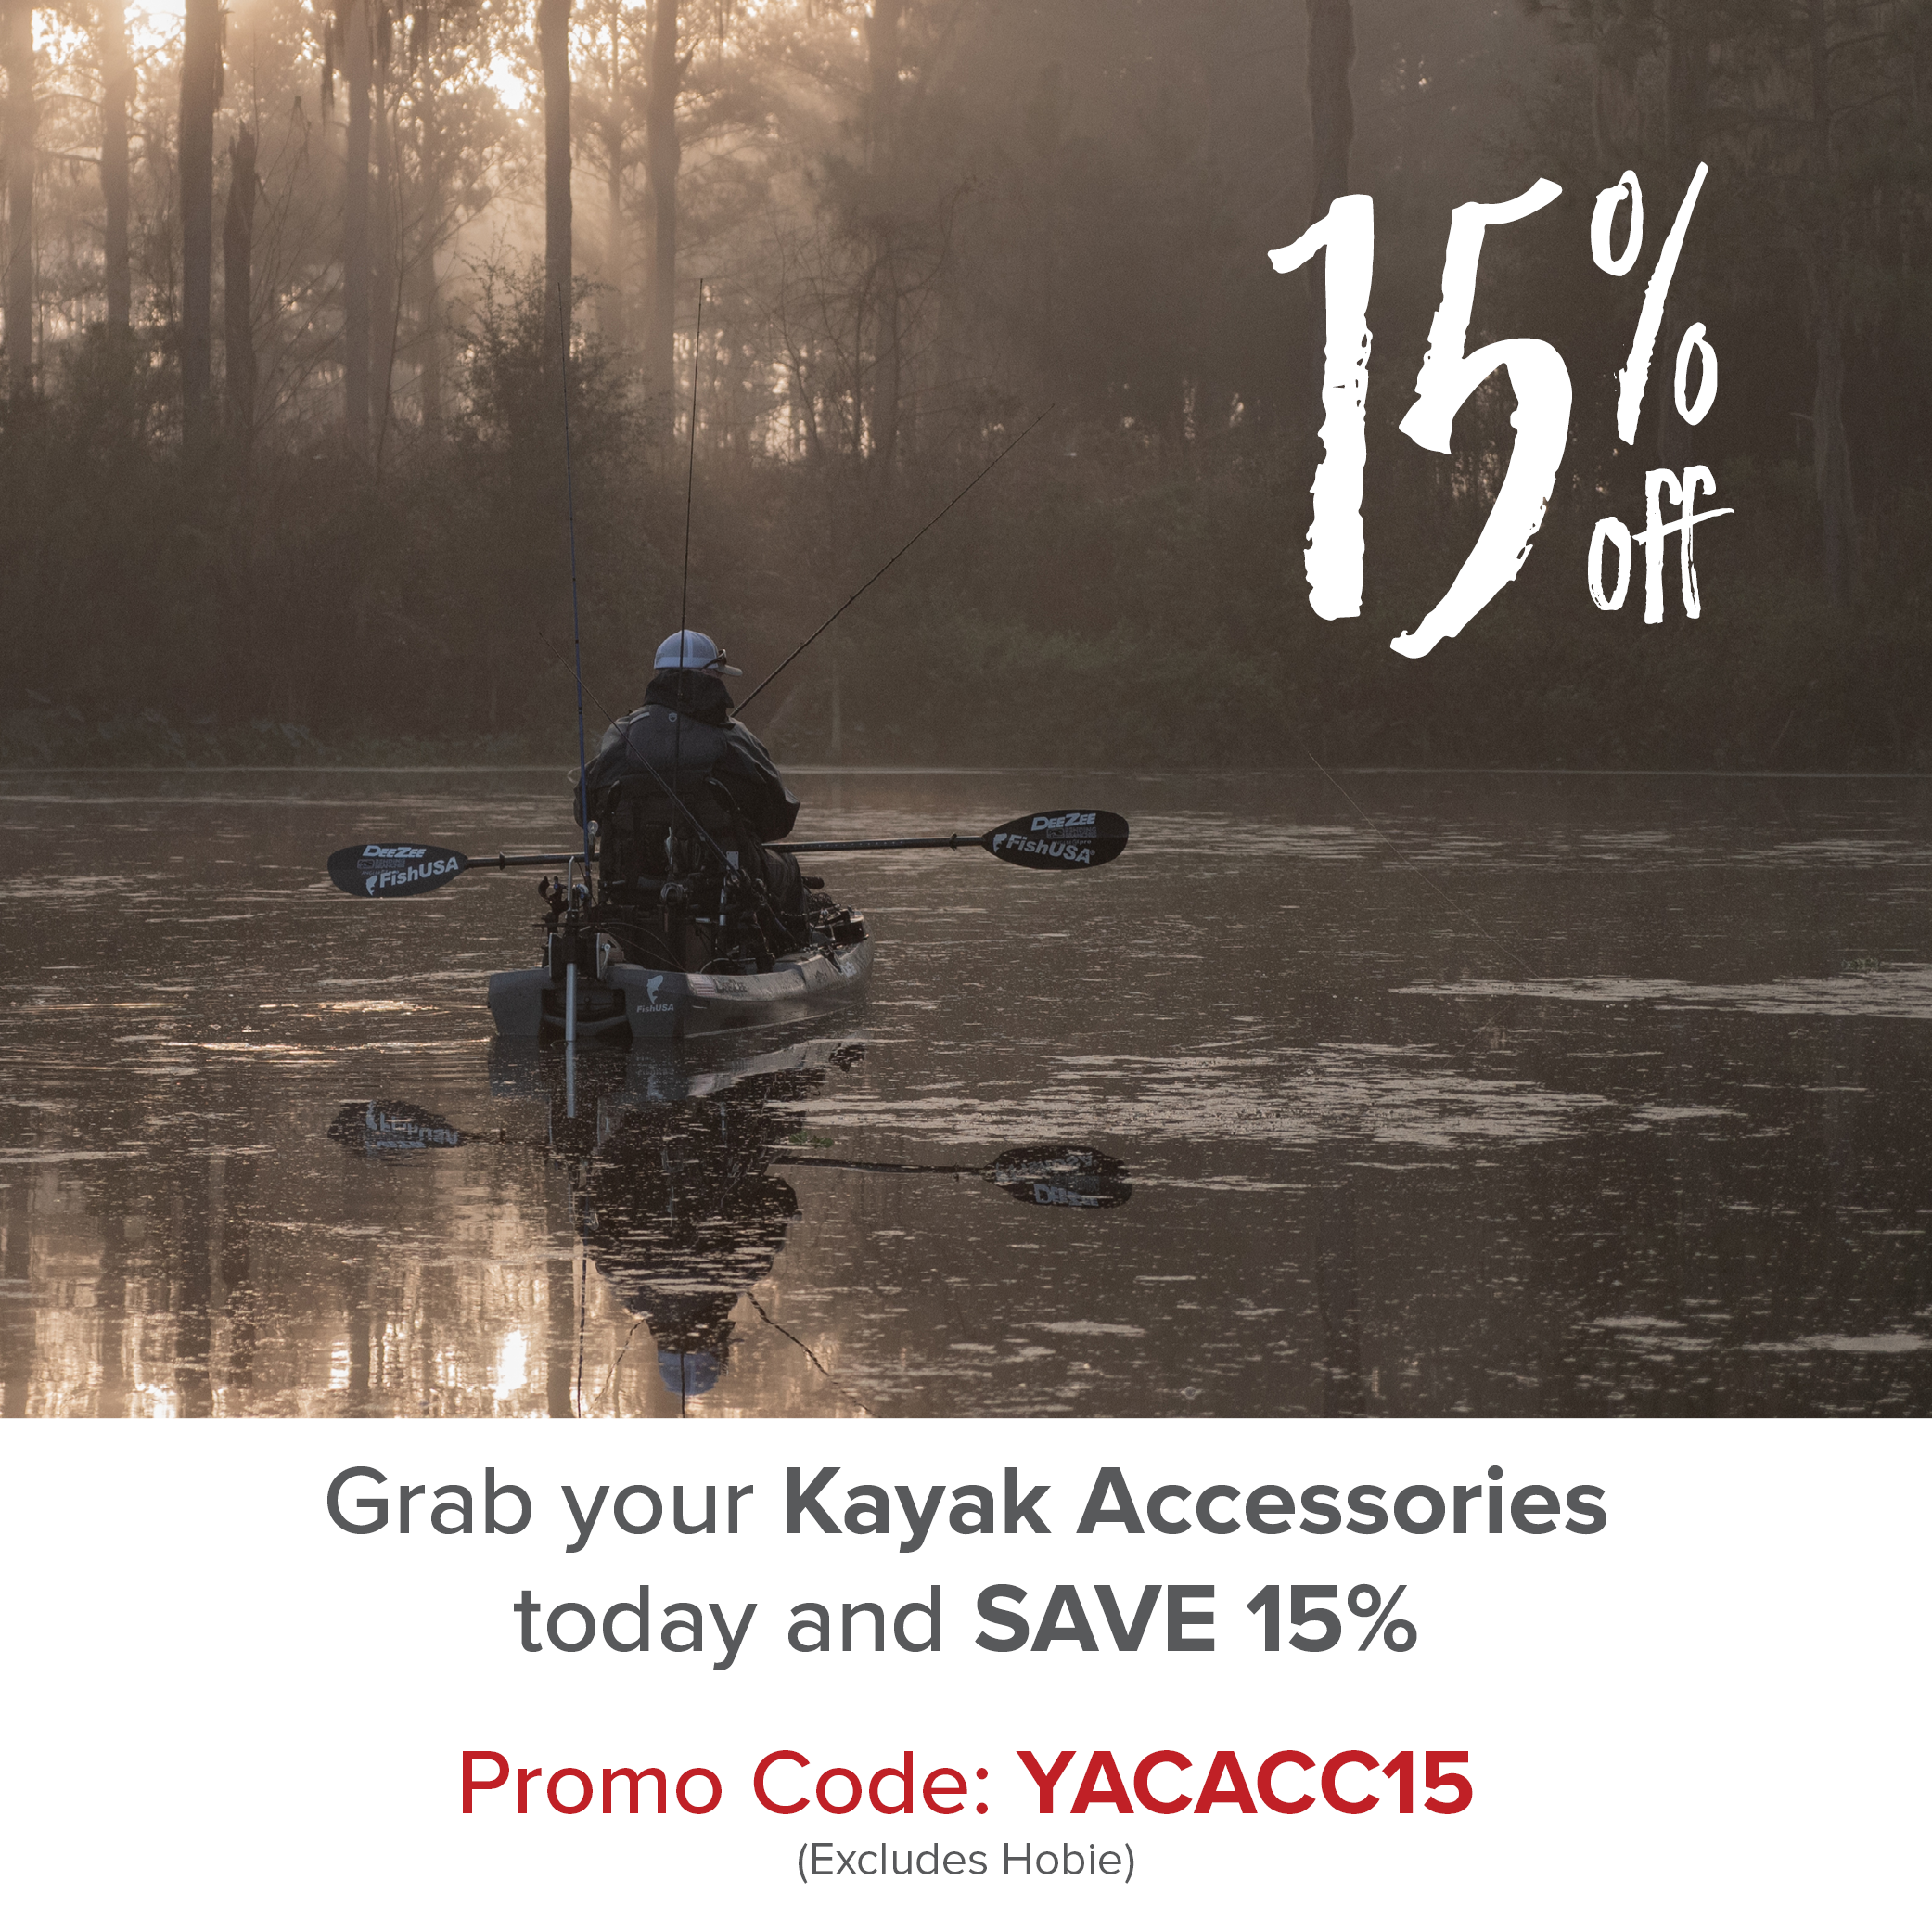 Grab your Kayak Accessories today and save 15%